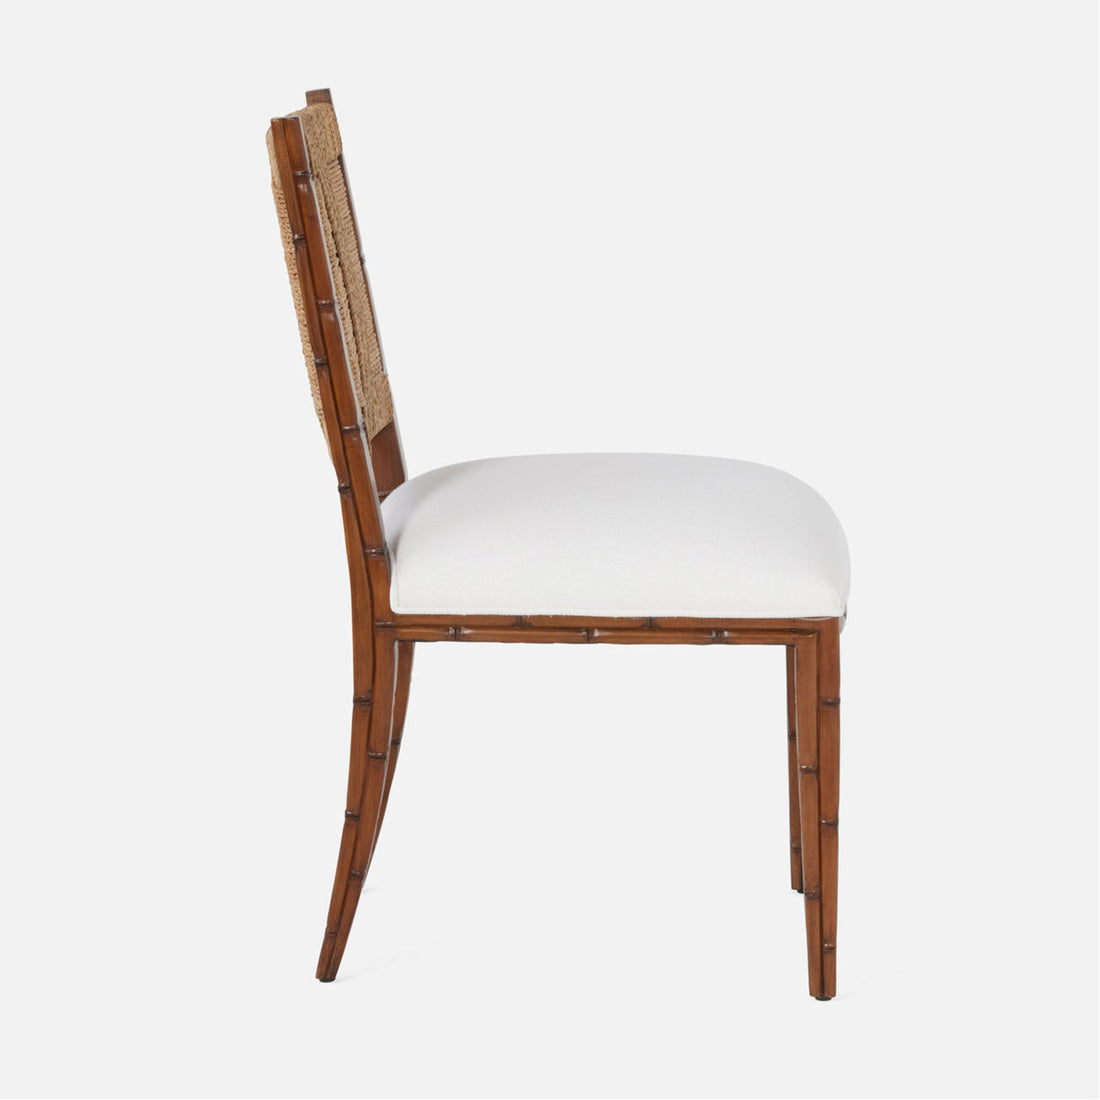 Made Goods Kiera Dining Chair in Weser Fabric